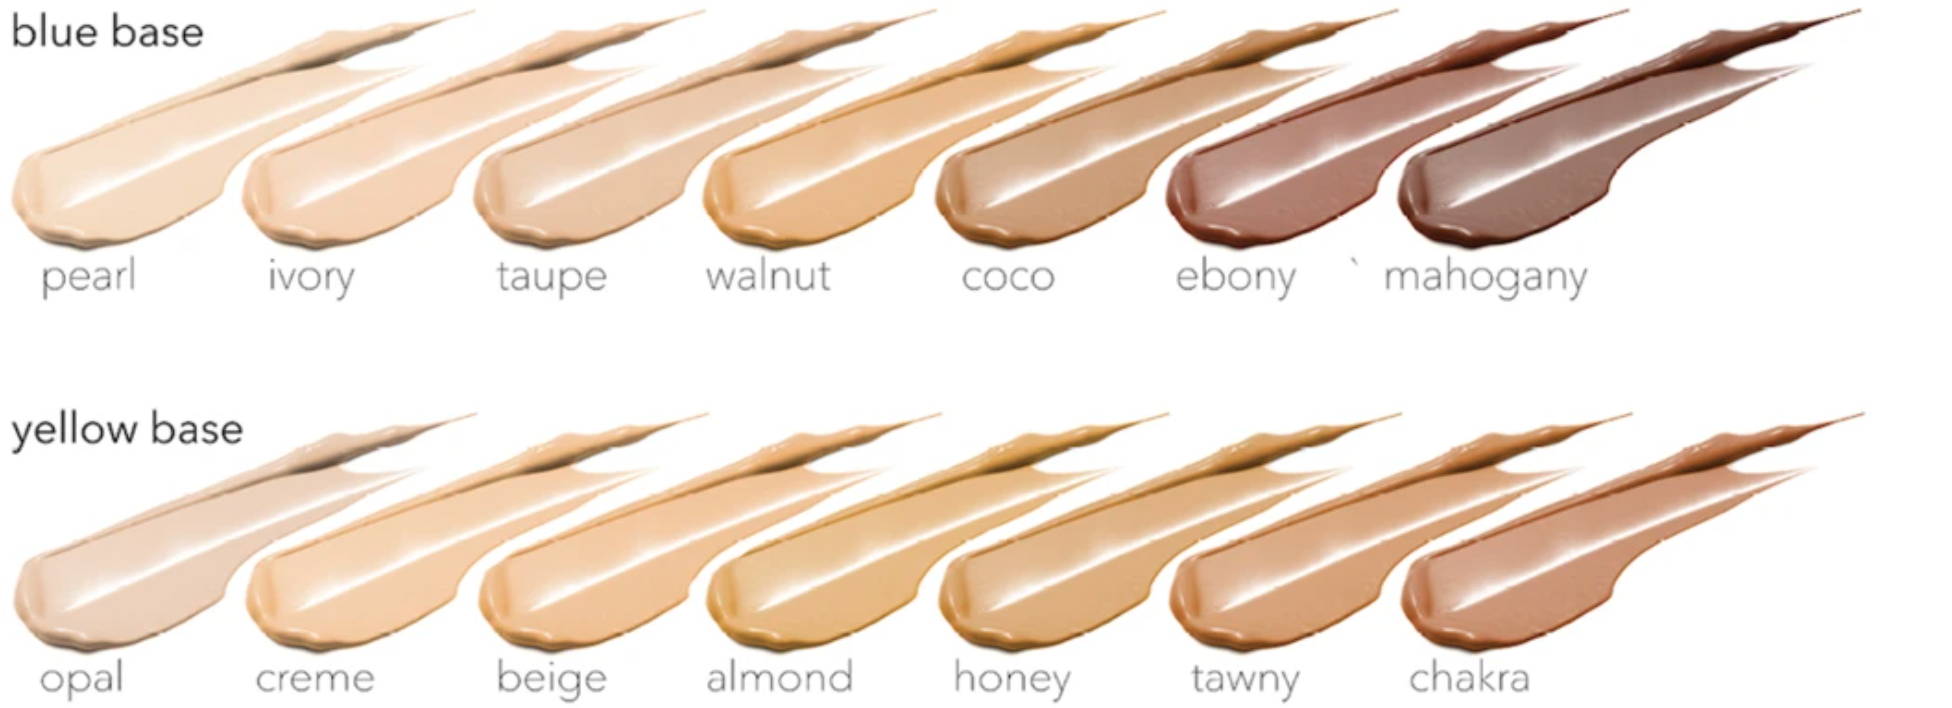 Infographic depicting seven blue based skin tones and seven yellow based skin tones